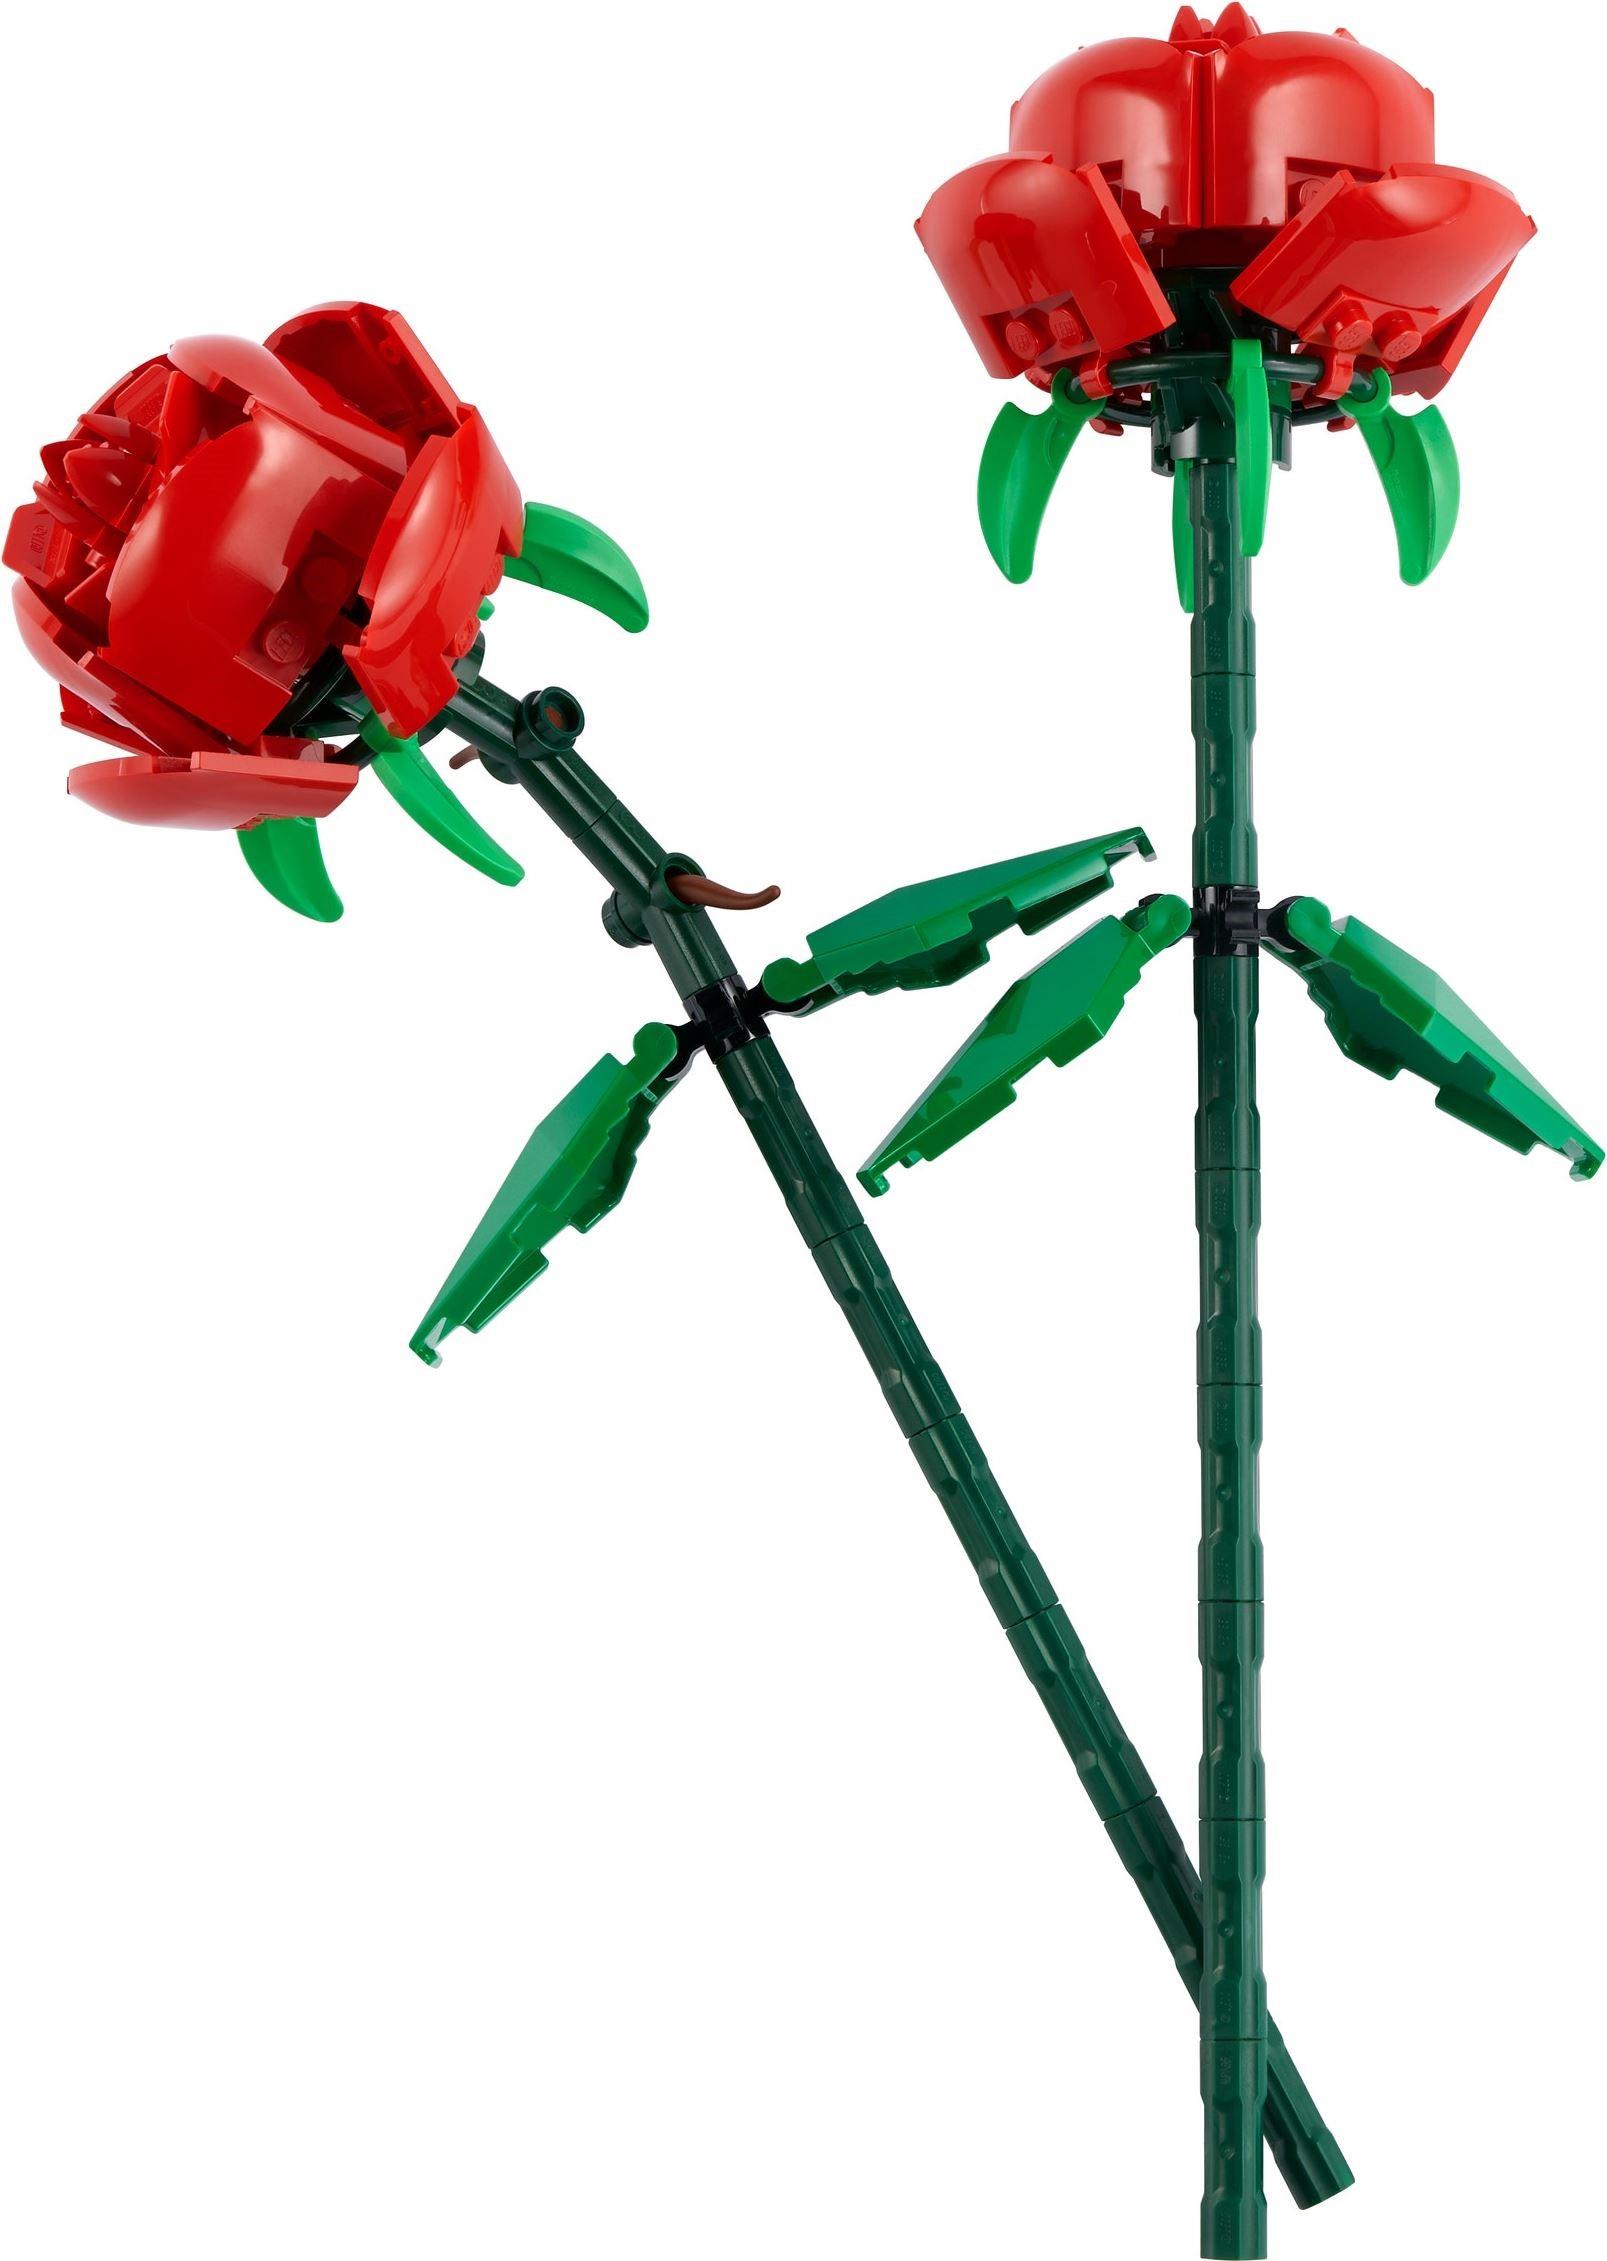 IN STOCK - LEGO 40460 CREATOR BOTANICAL COLLECTION ROSE ROSES (2021) - MISB